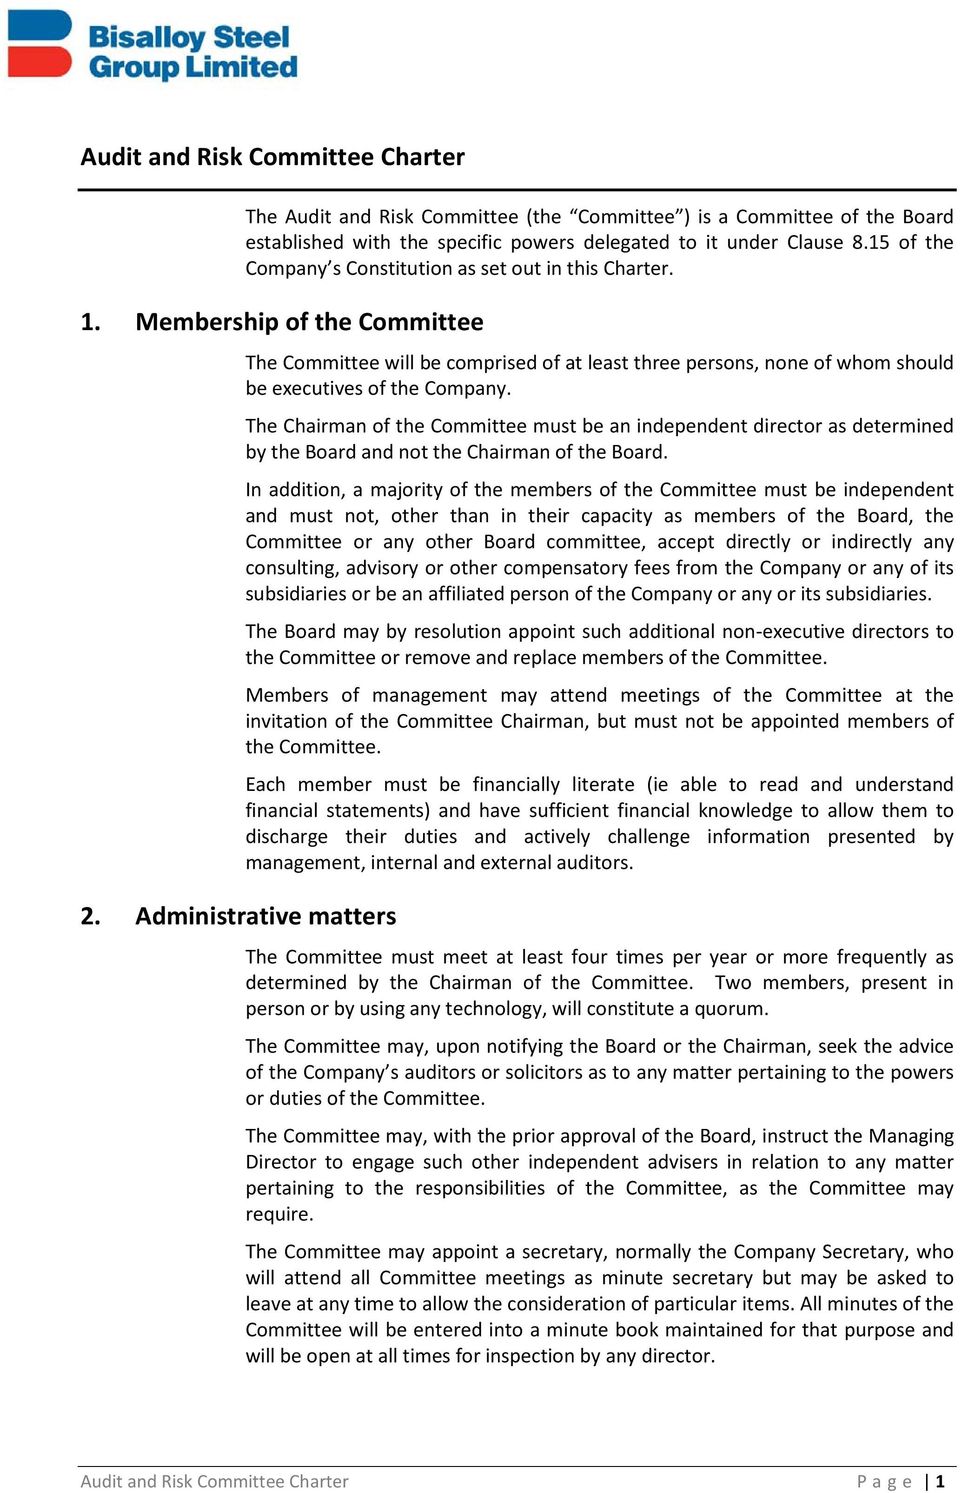 The Chairman of the Committee must be an independent director as determined by the Board and not the Chairman of the Board.